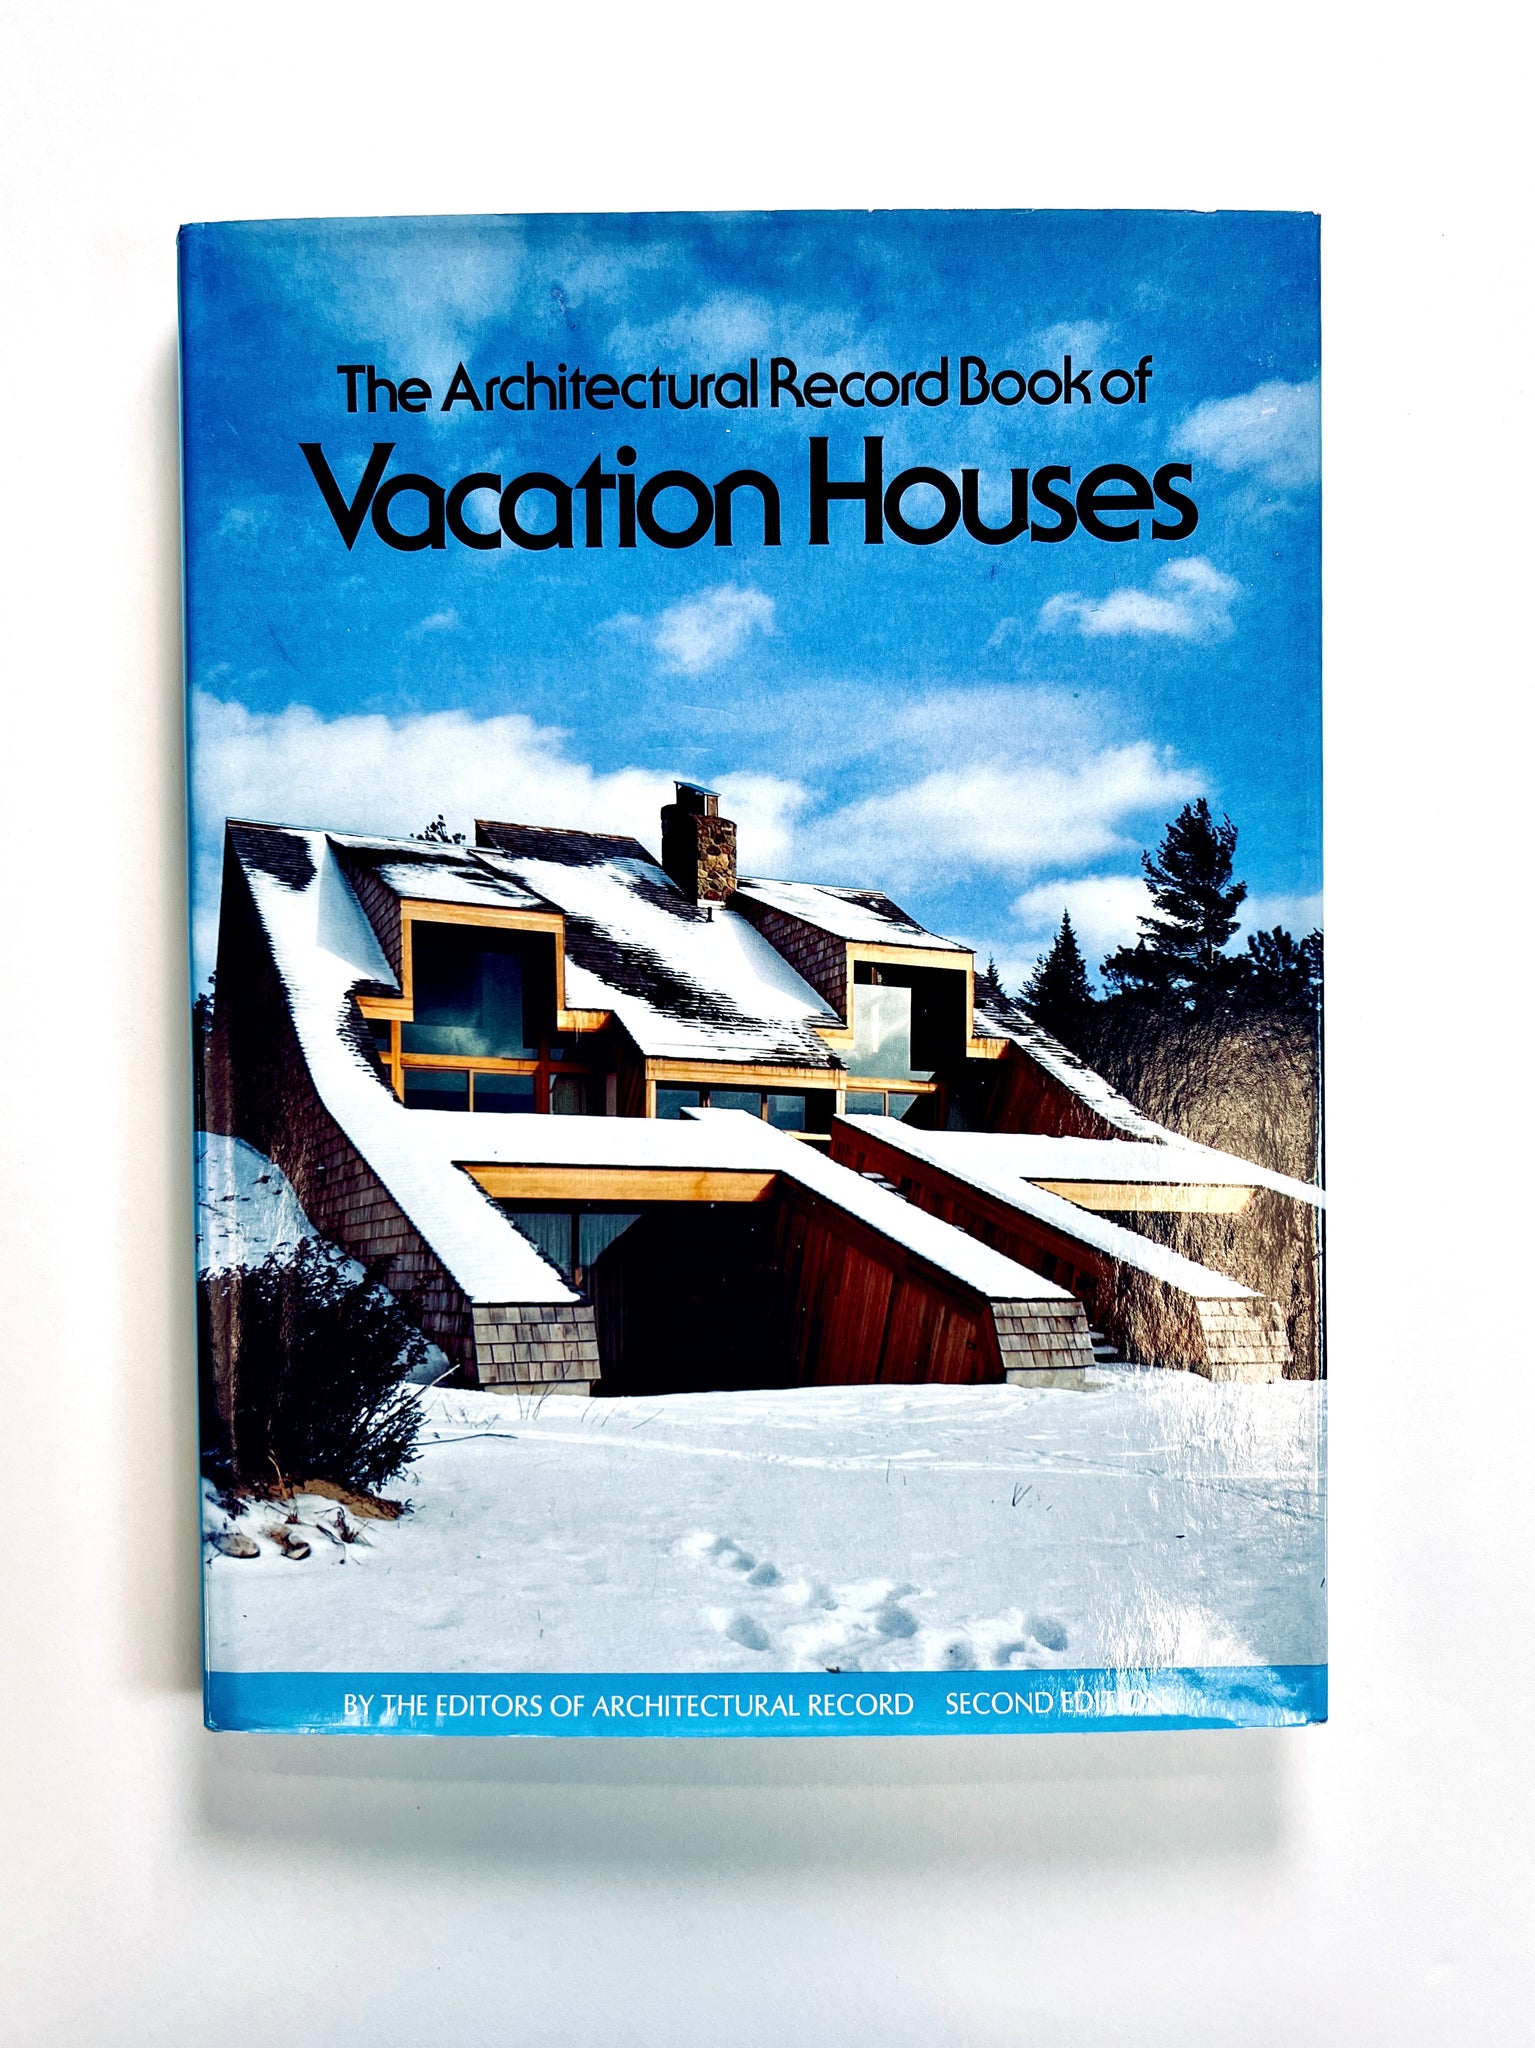 ROBINSON. Jerry and Martin Filler, eds. The Architectural Record Book of Vacation Houses.